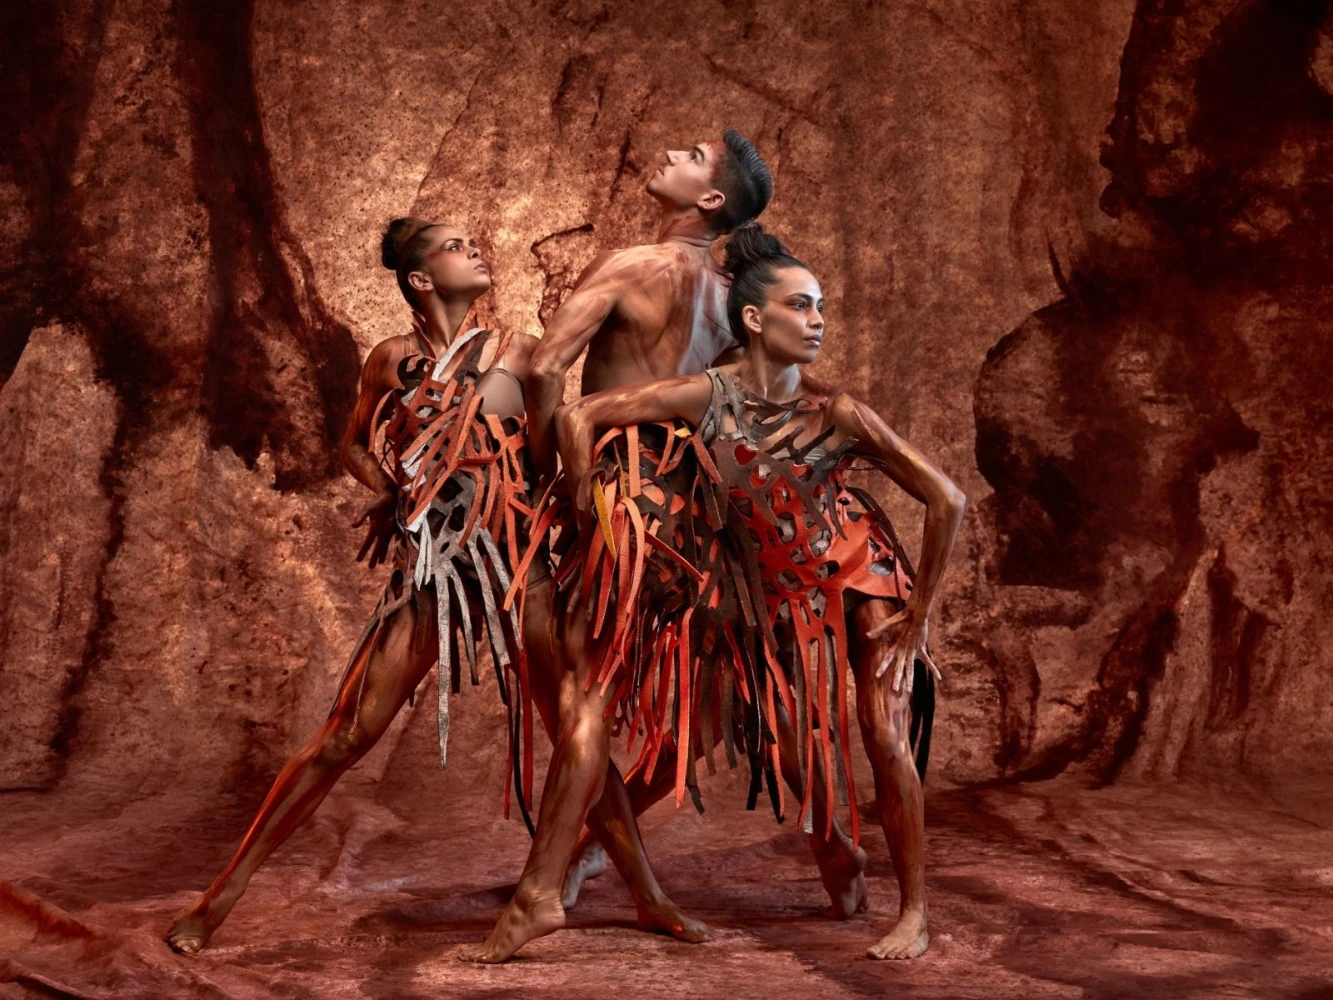 SandSong presented by Bangarra Dance Theatre: What to expect - 2